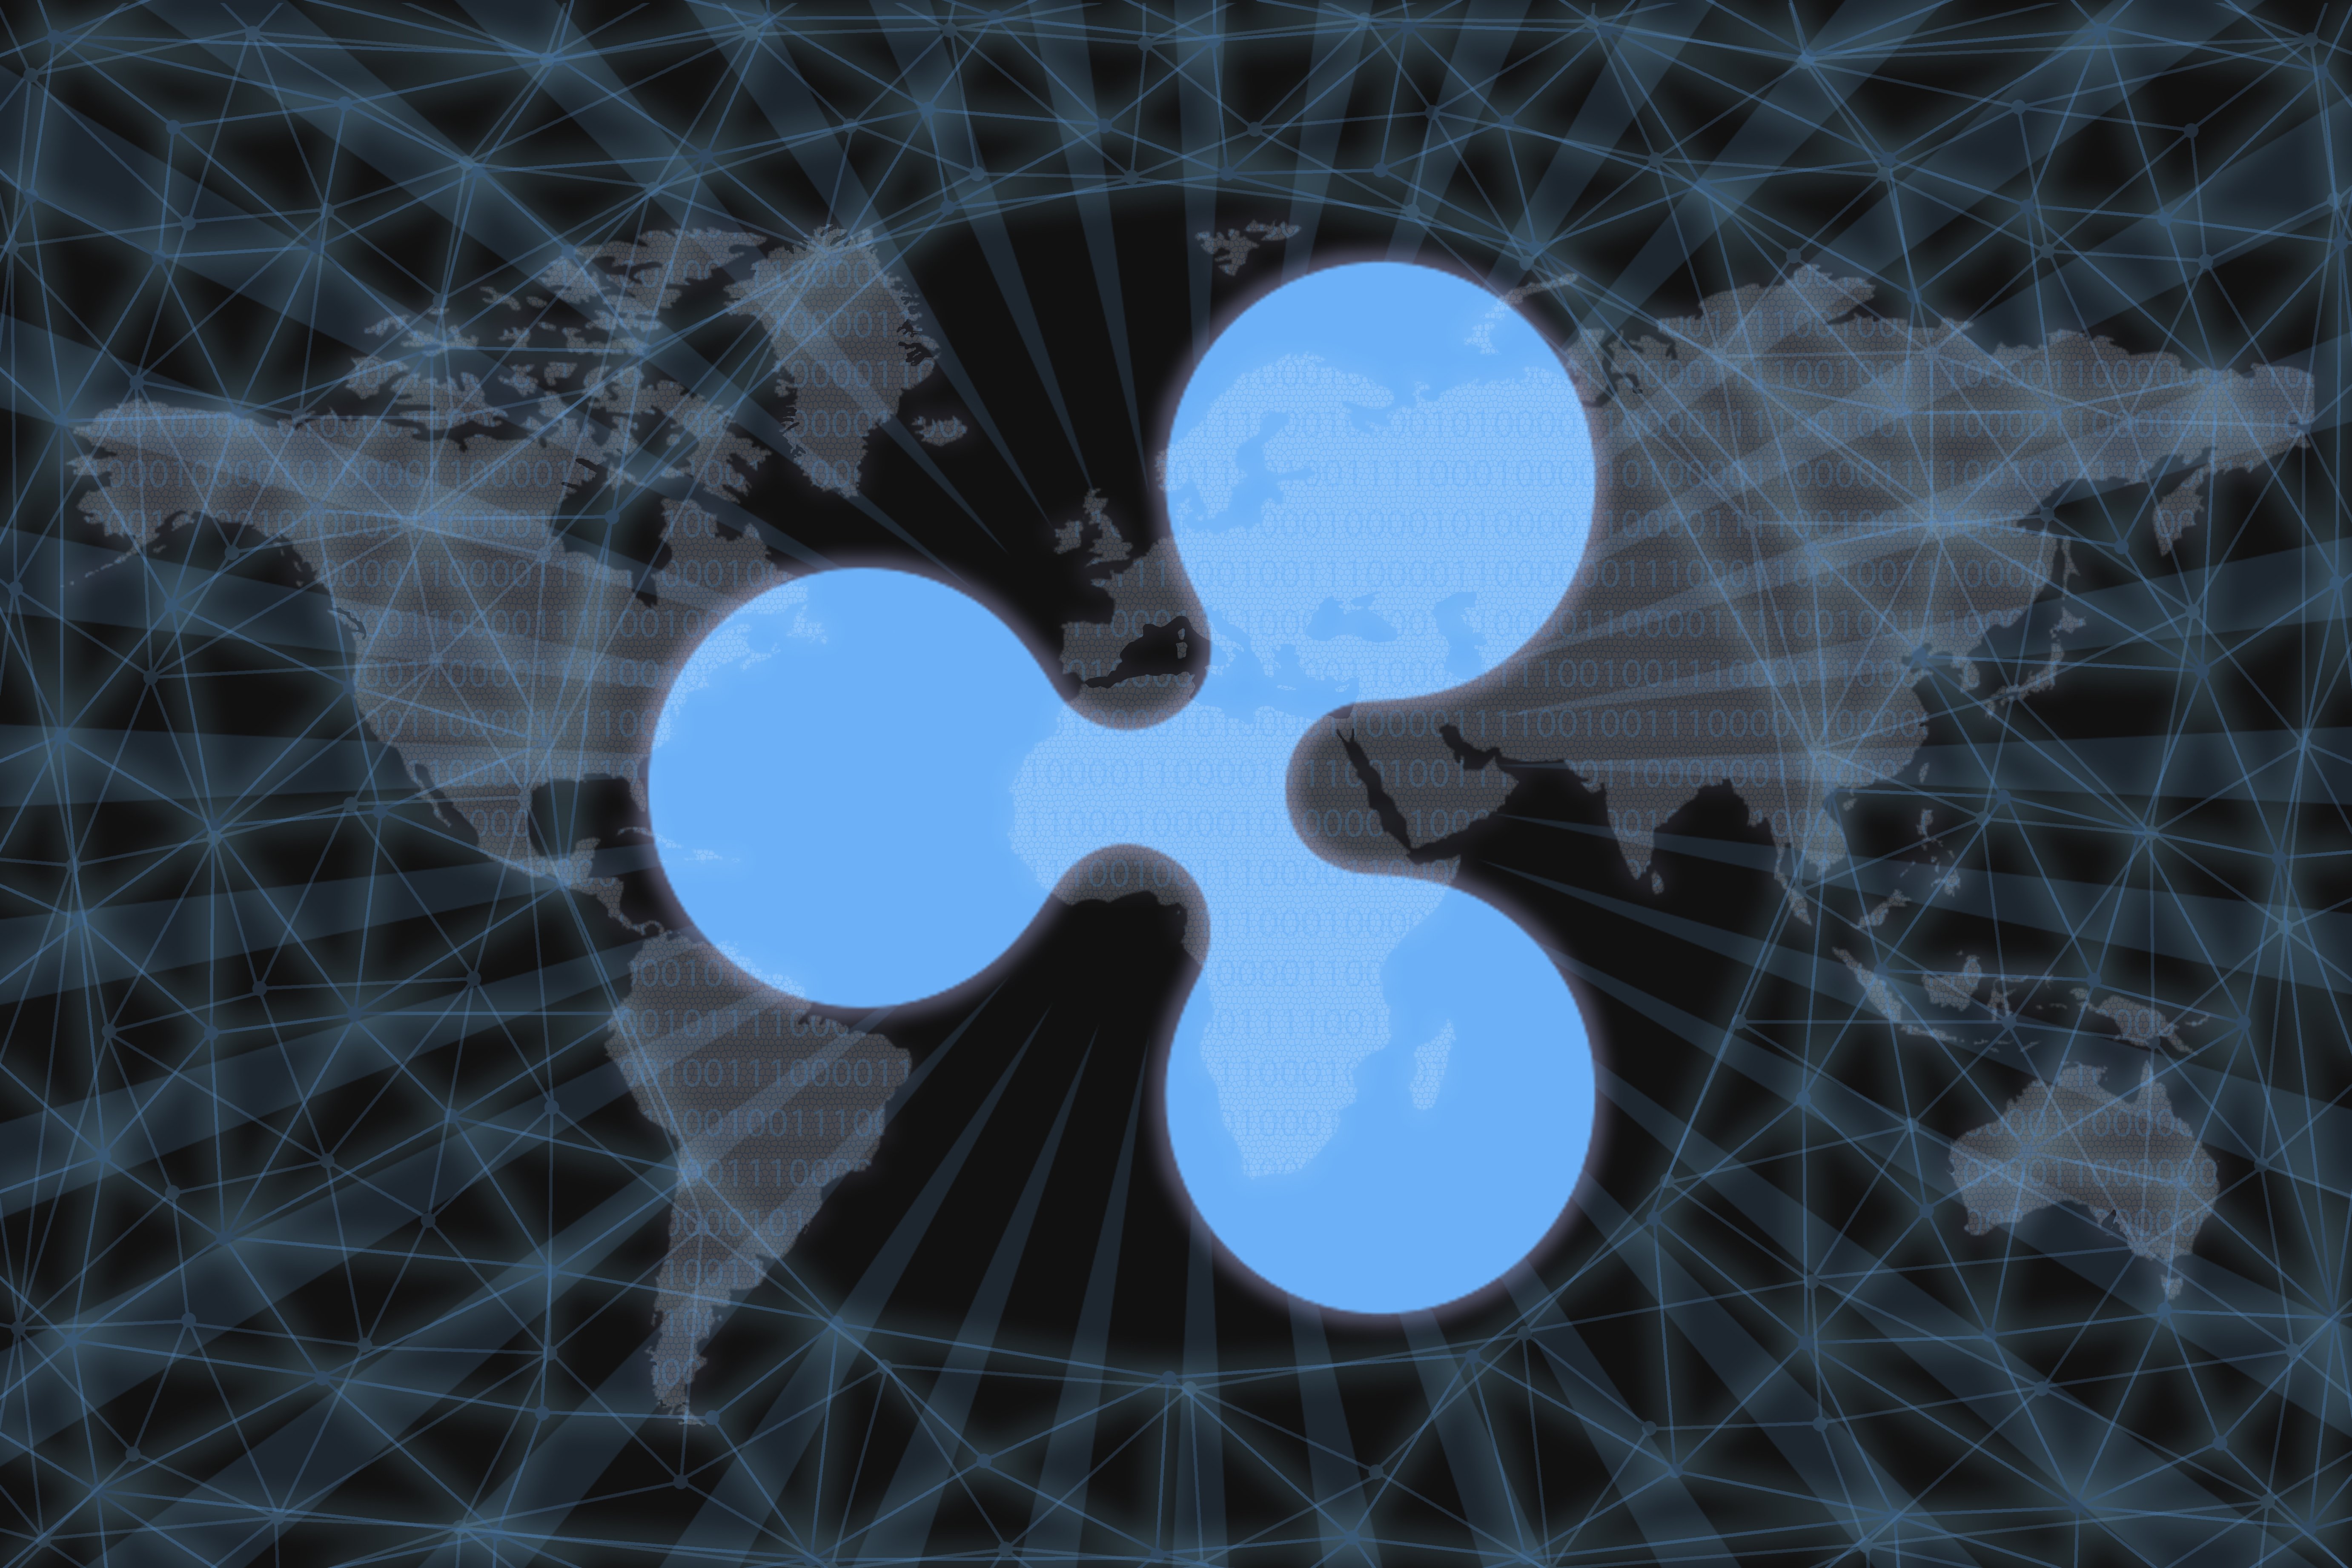 Ripple Sold $408 Million Worth of XRP in Q2